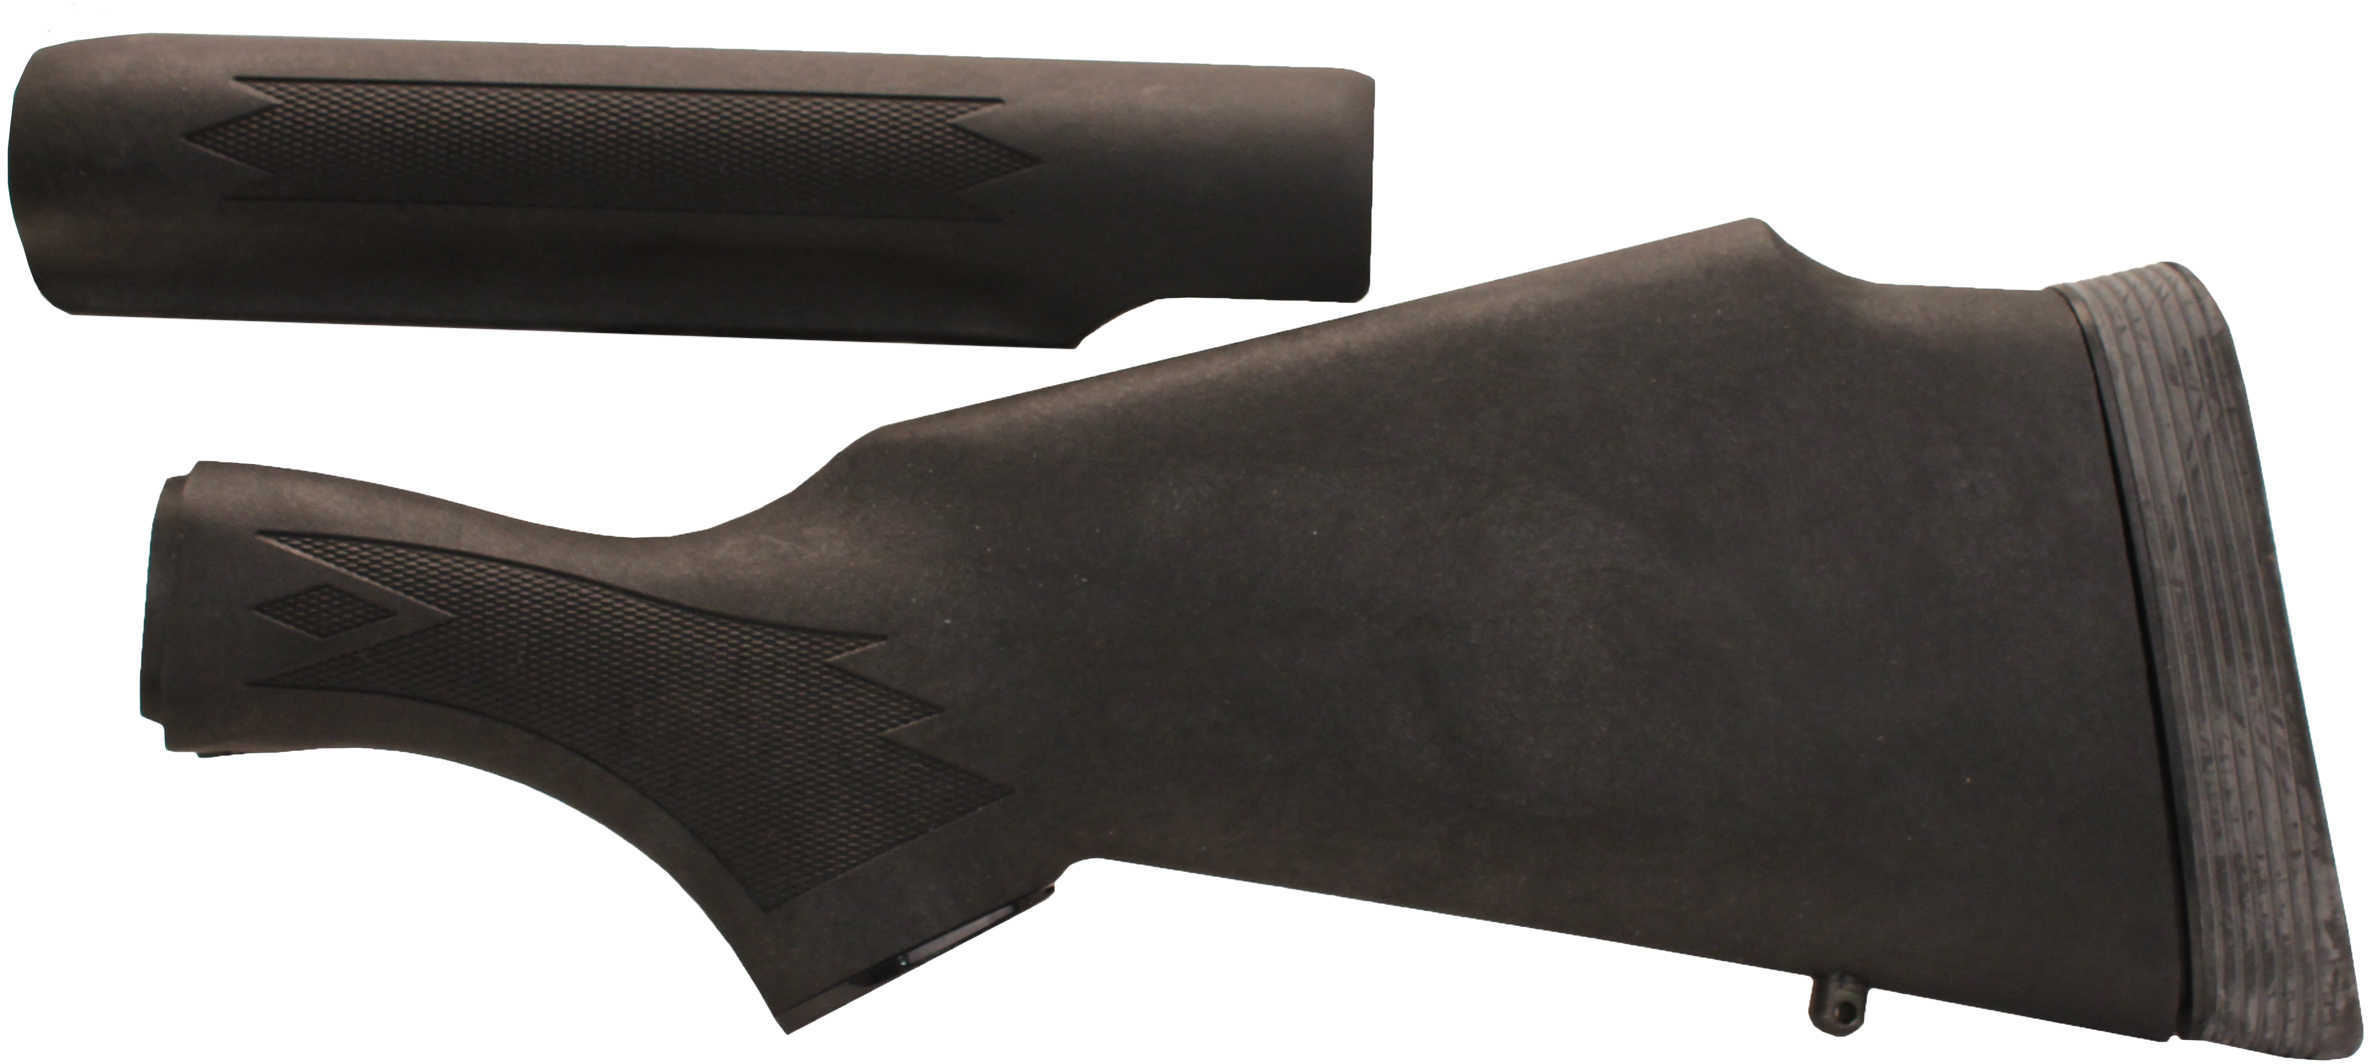 Remington 870 Stock & Forend Monte Carlo Supercell Pa